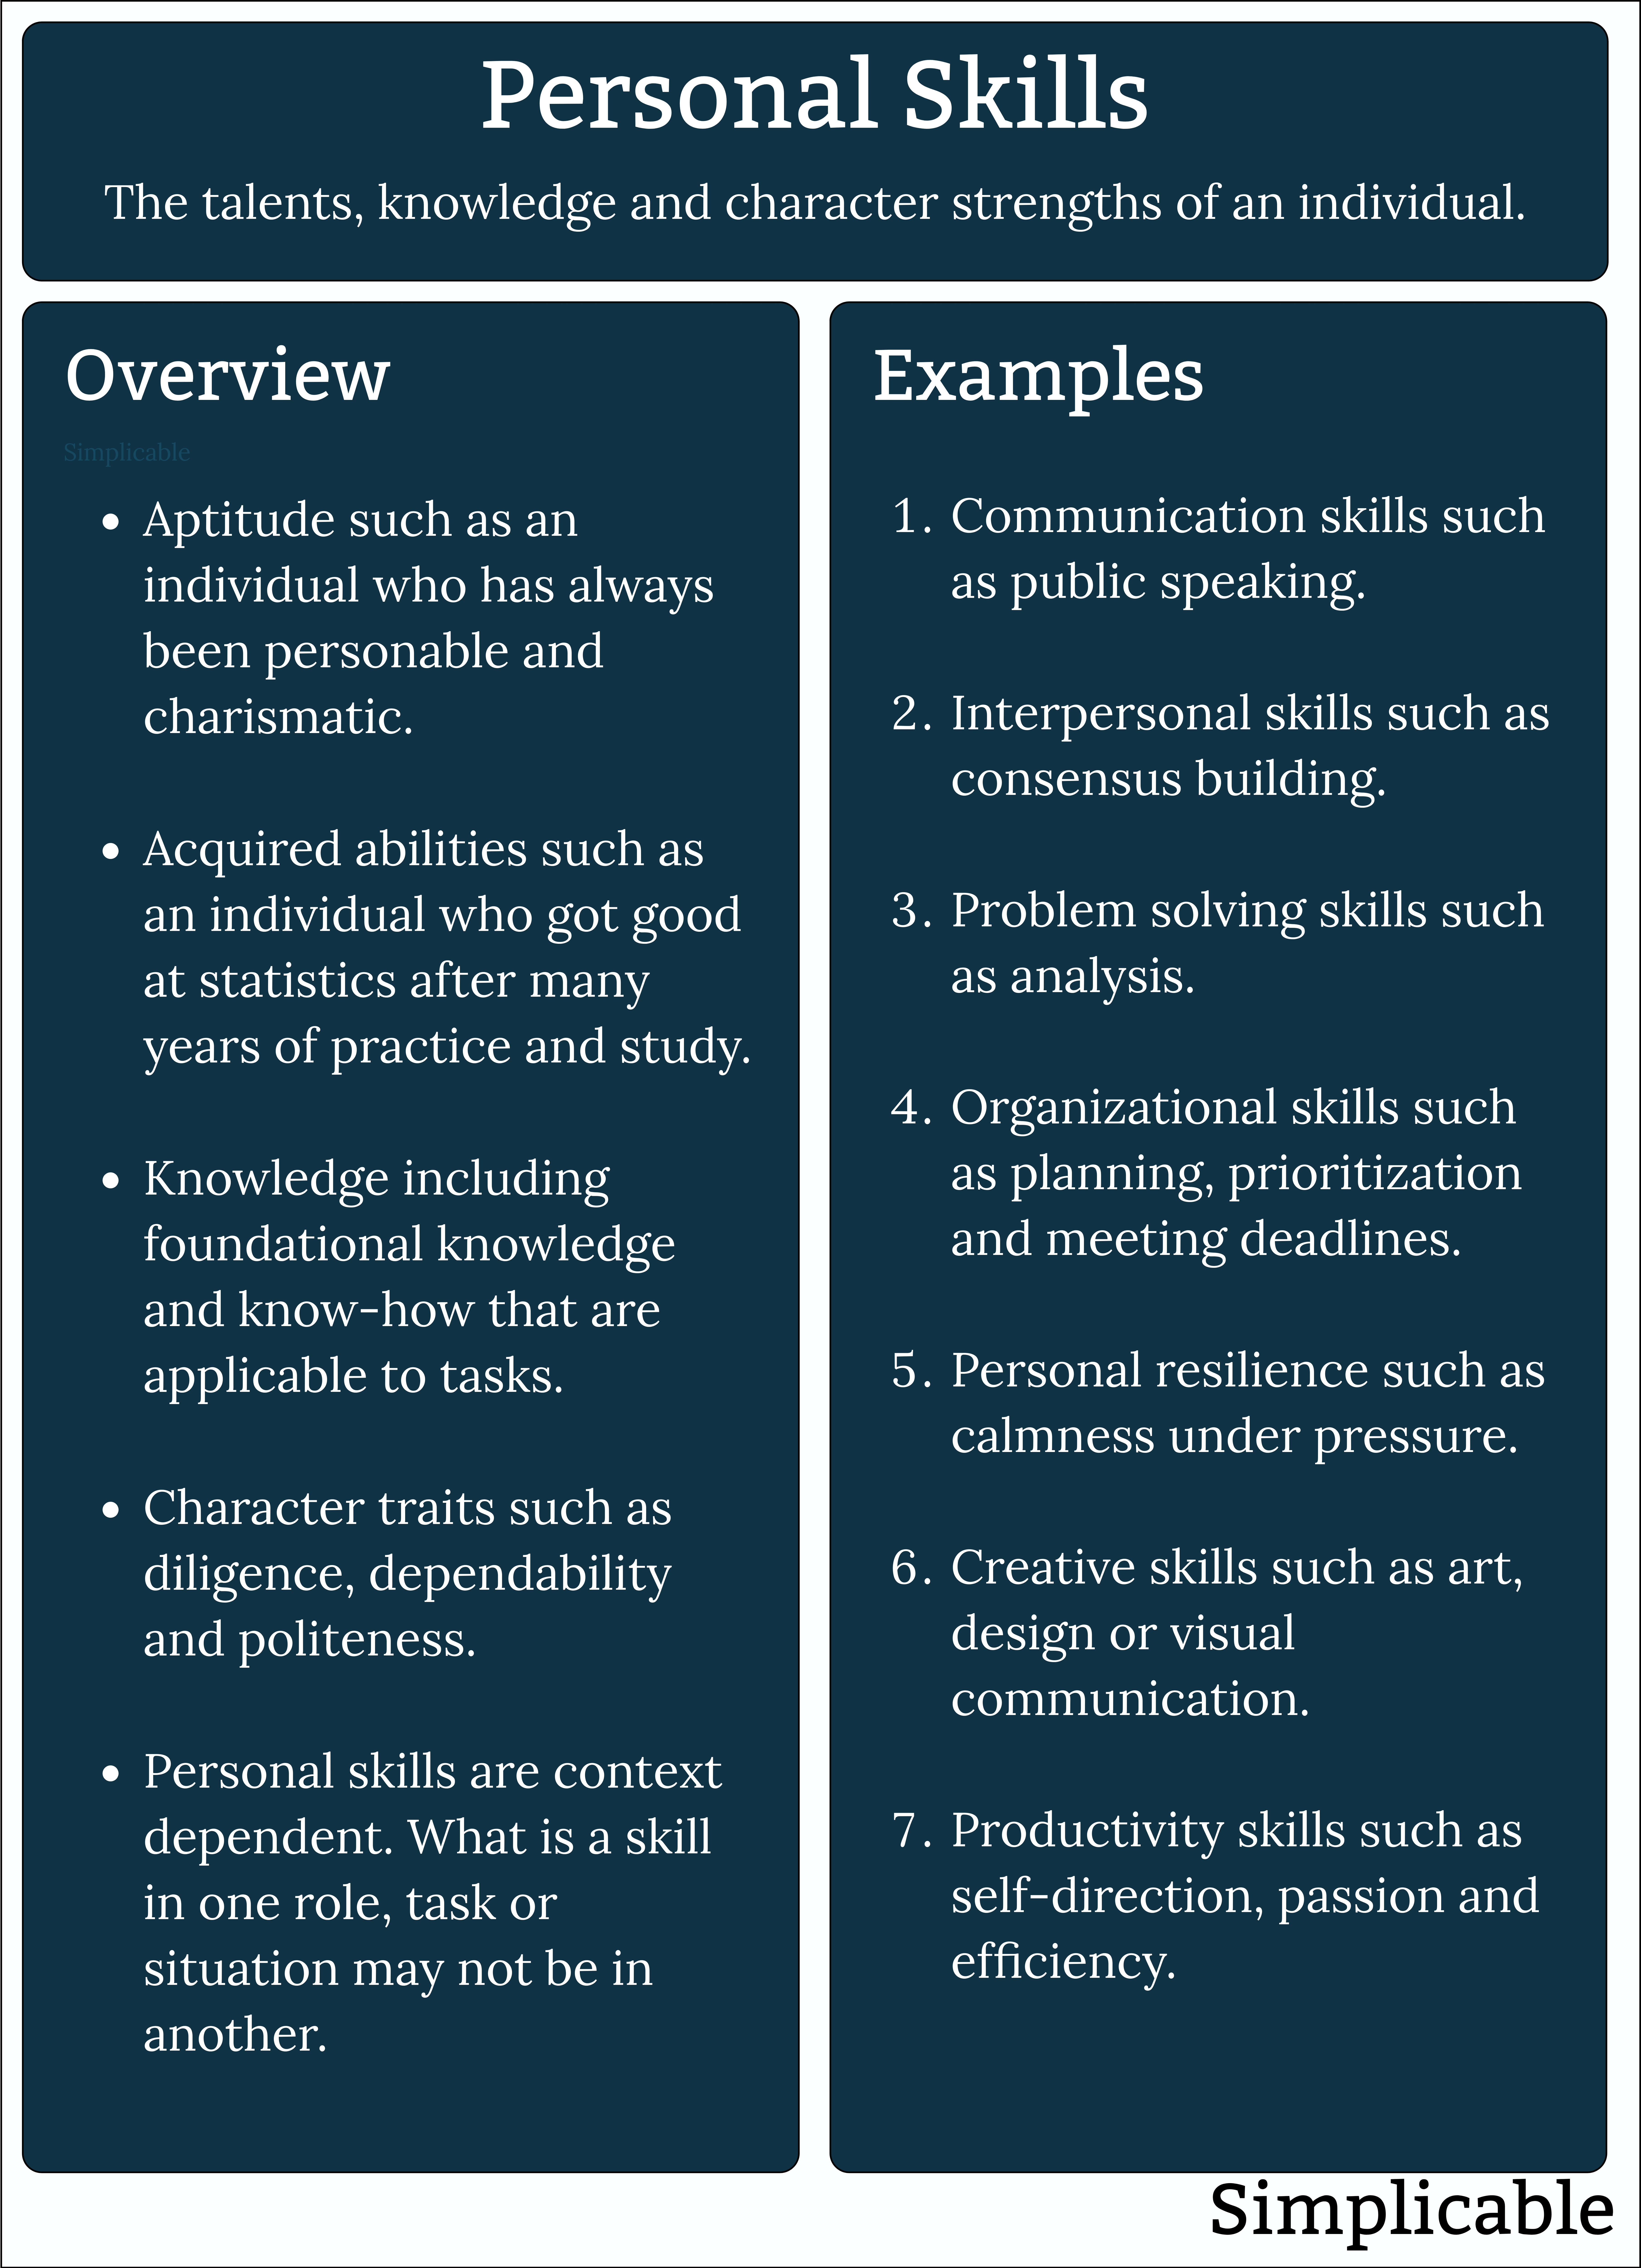 personal skills overview and examples